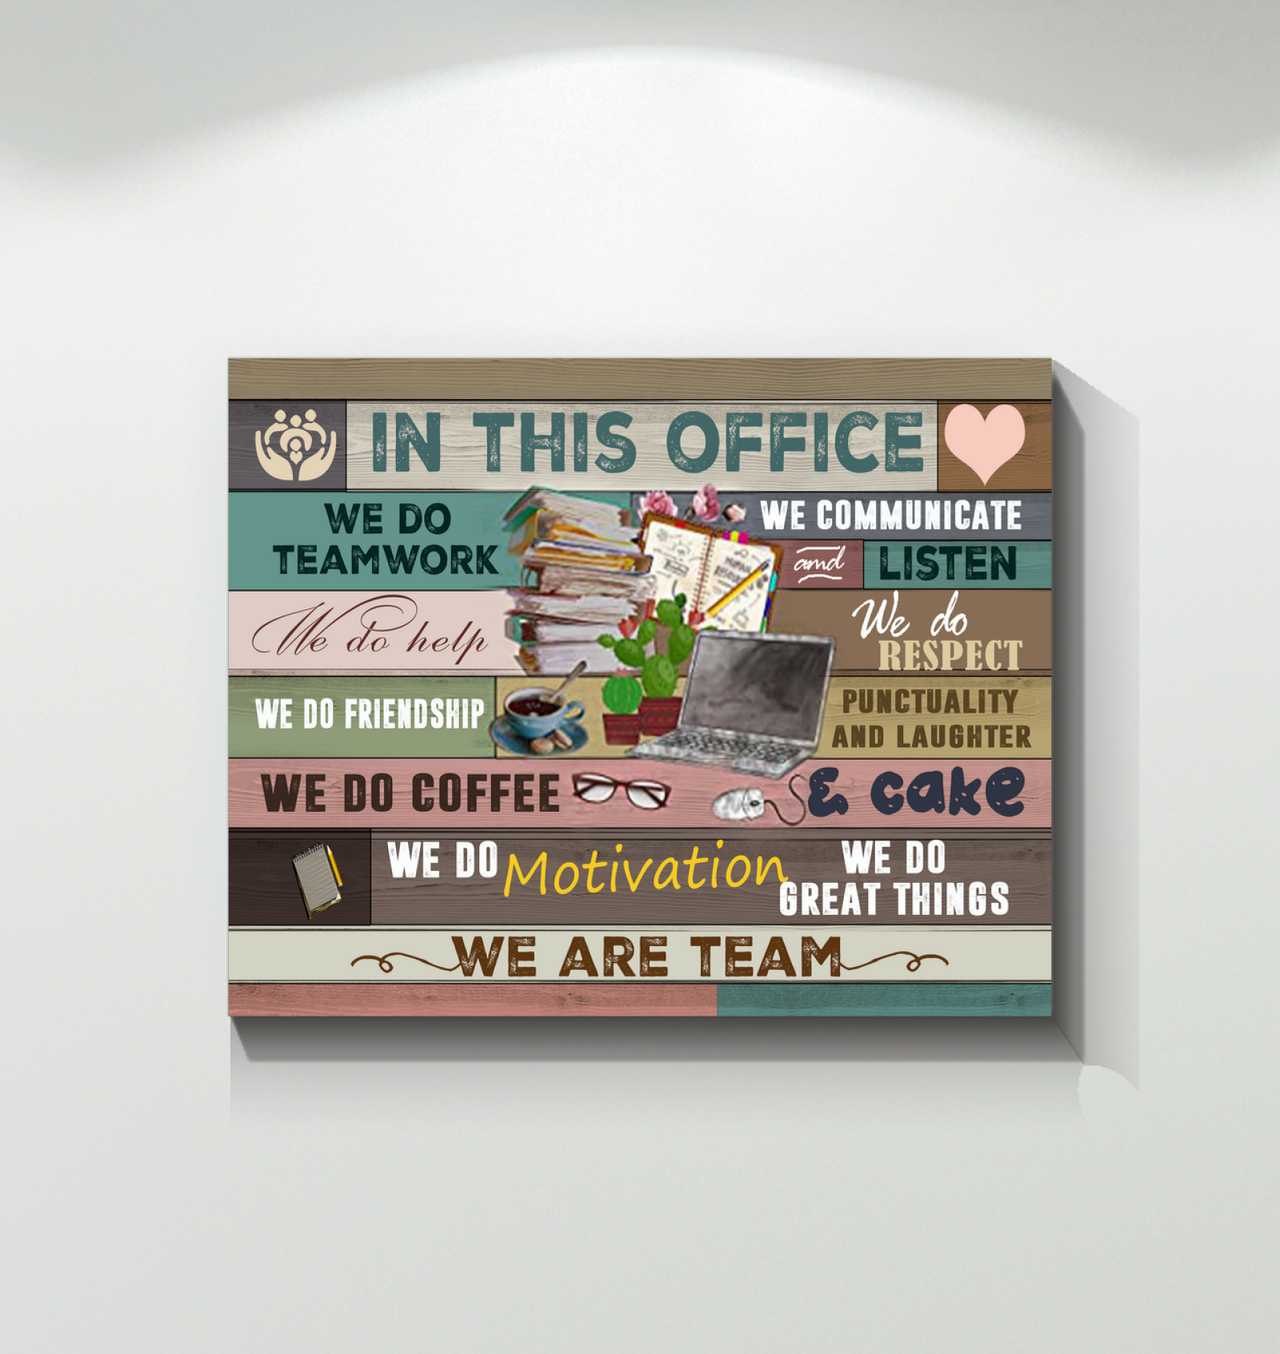 DesDirect2 Store in This Office We Do Teamwork We Do Help We Communicate and Listen We are a Team Canvas Art Wall Decor 1.25in Frame - Landscape Wall Art Home